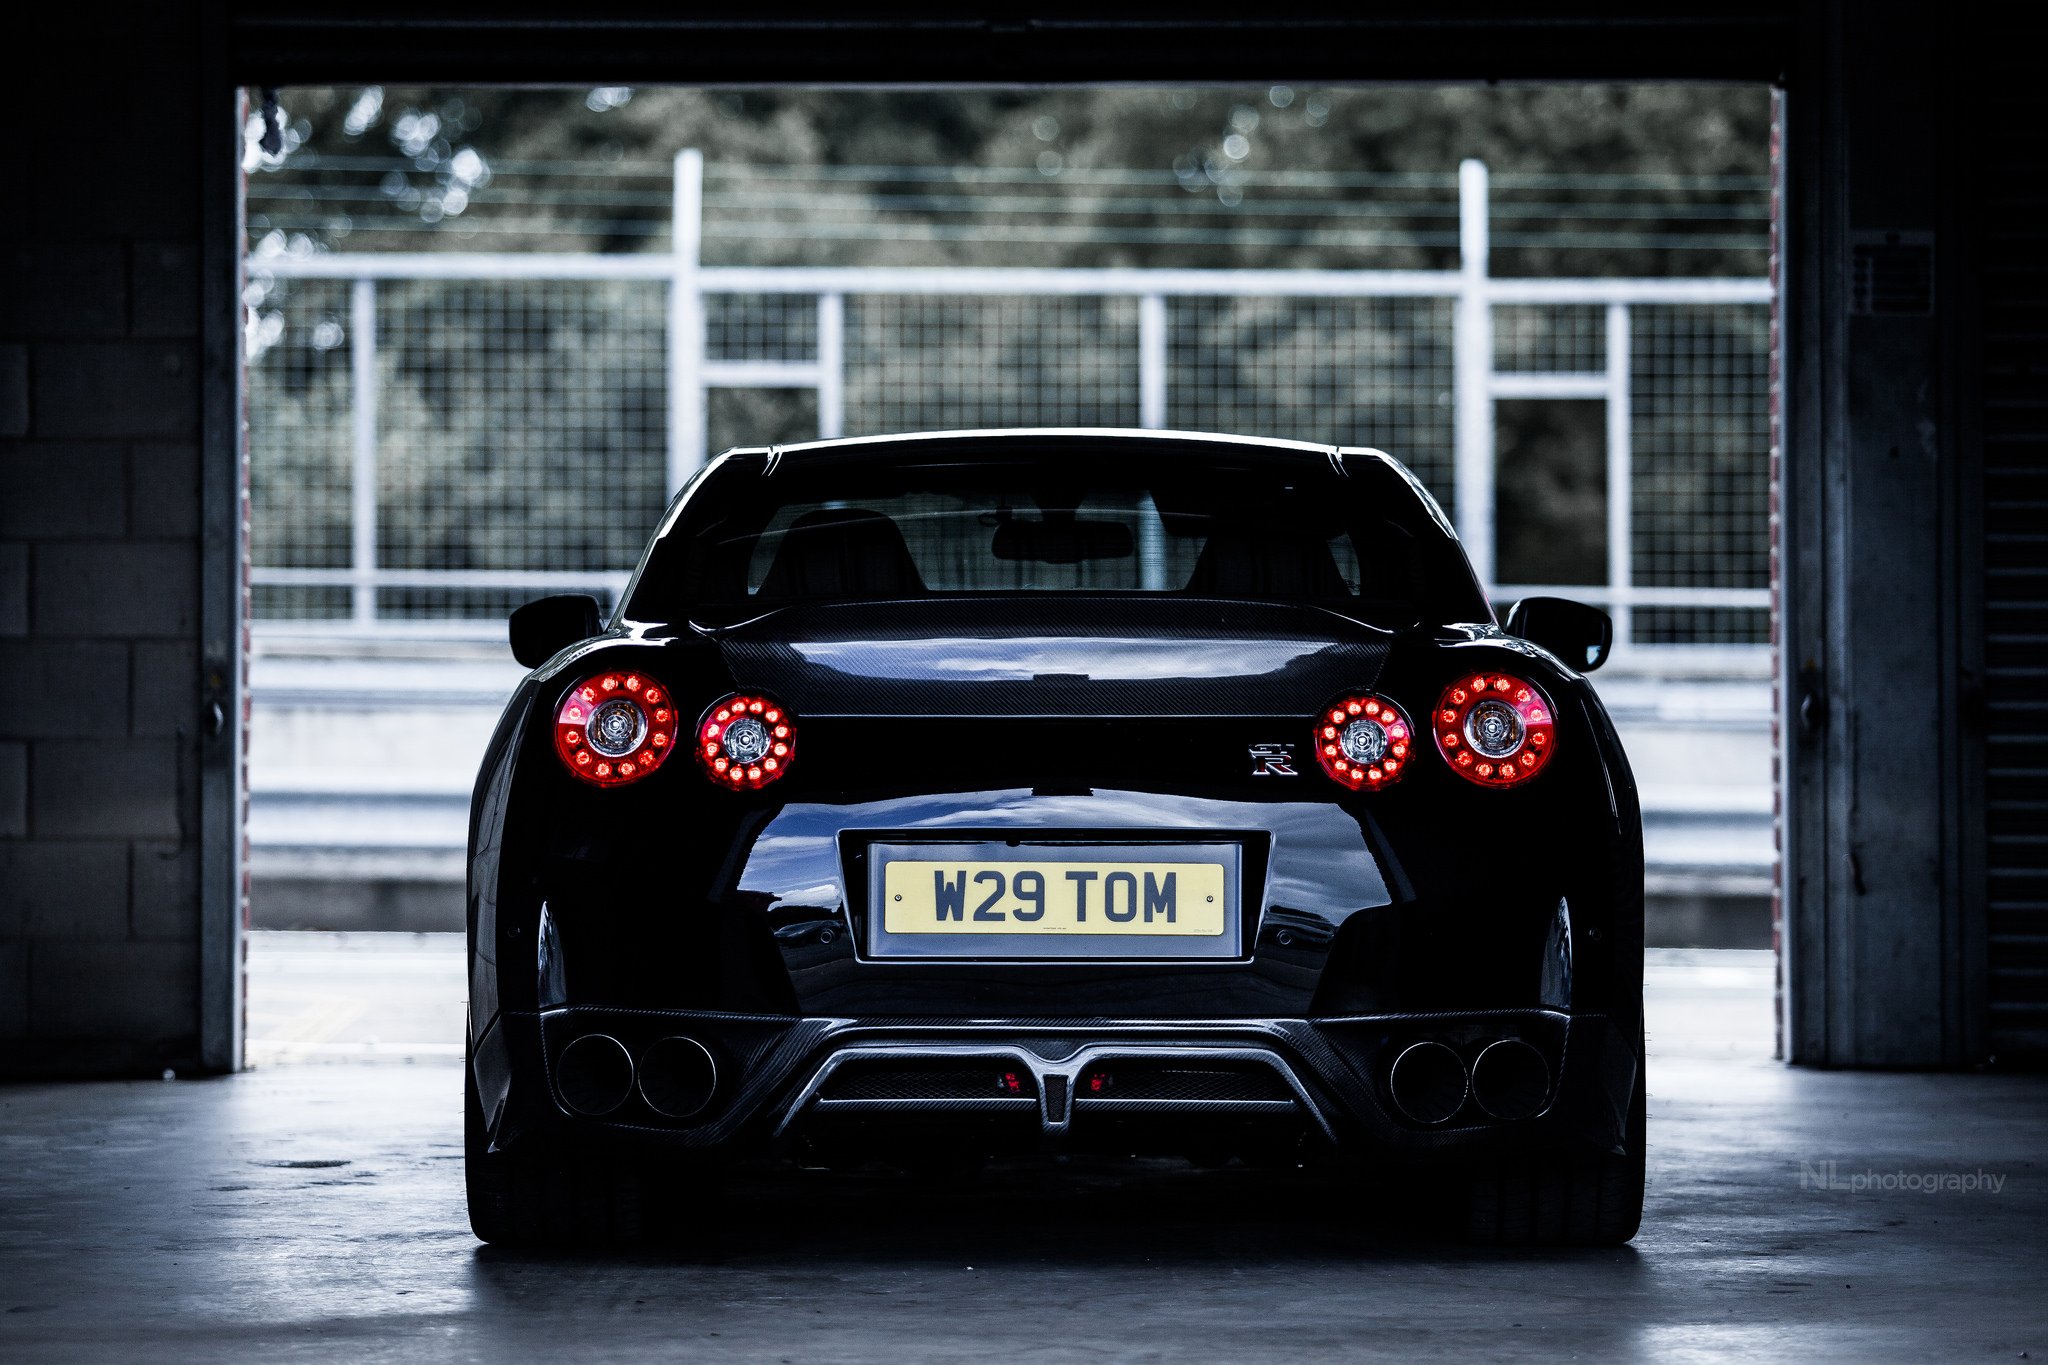 gt r, Nismo, Nissan, R Tuning, Supercar, Coupe, Japan, Noire, Black, Nero Wallpaper HD / Desktop and Mobile Background